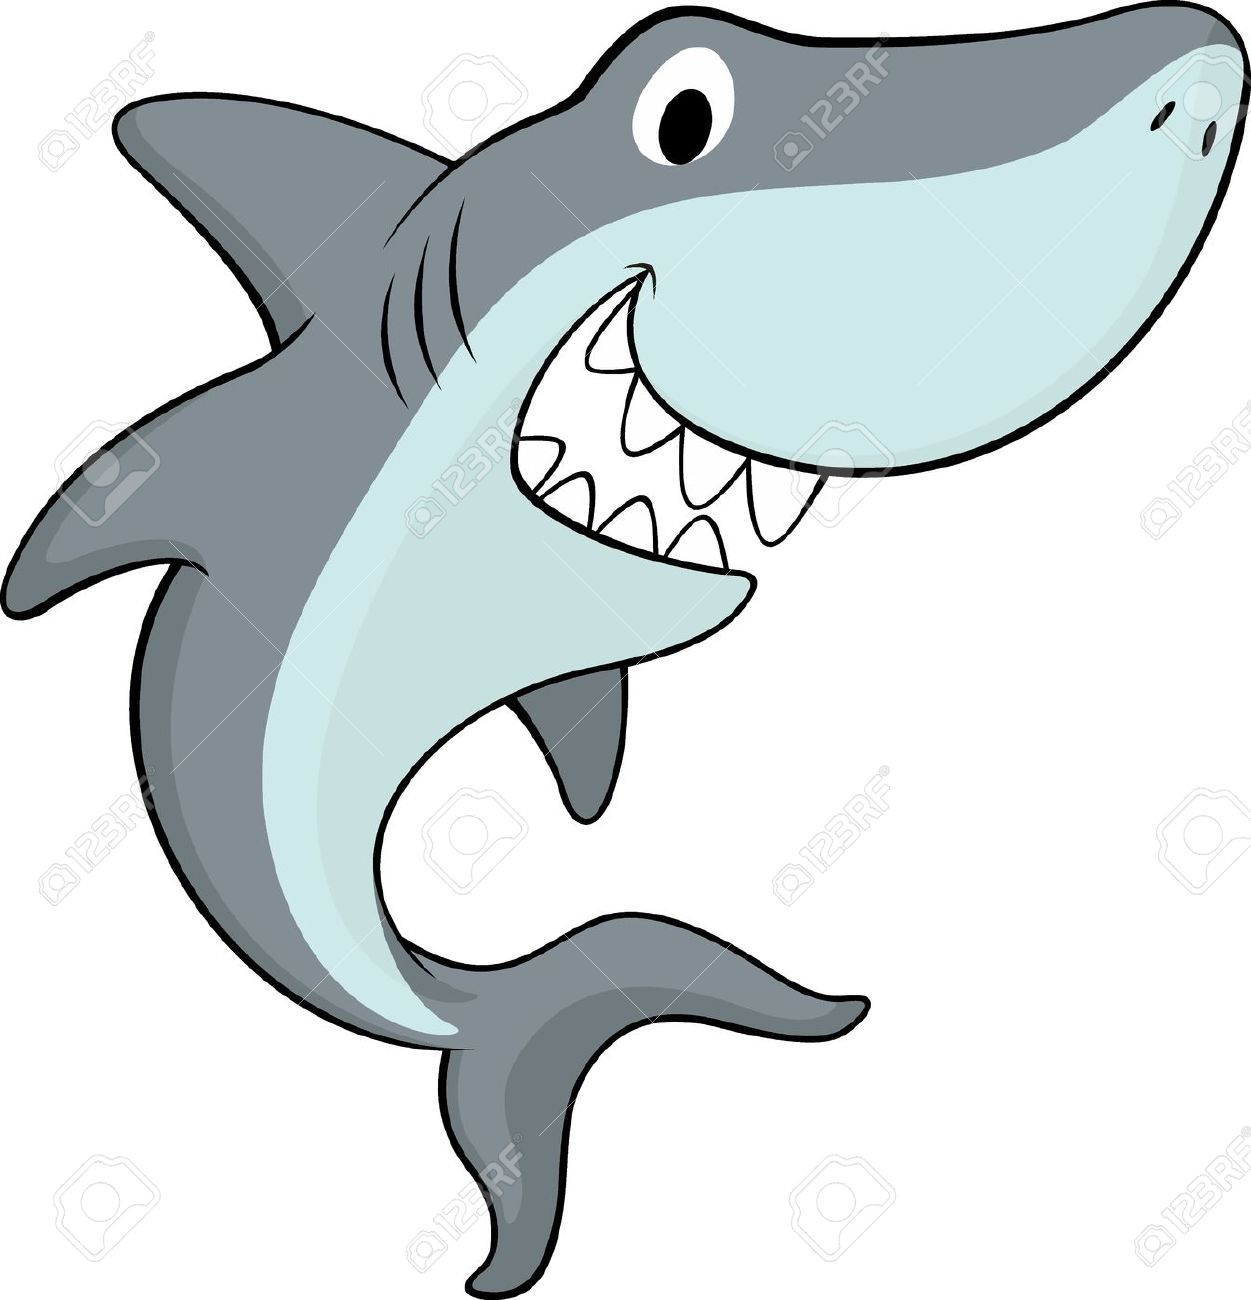 Sharks can be cute and fun to